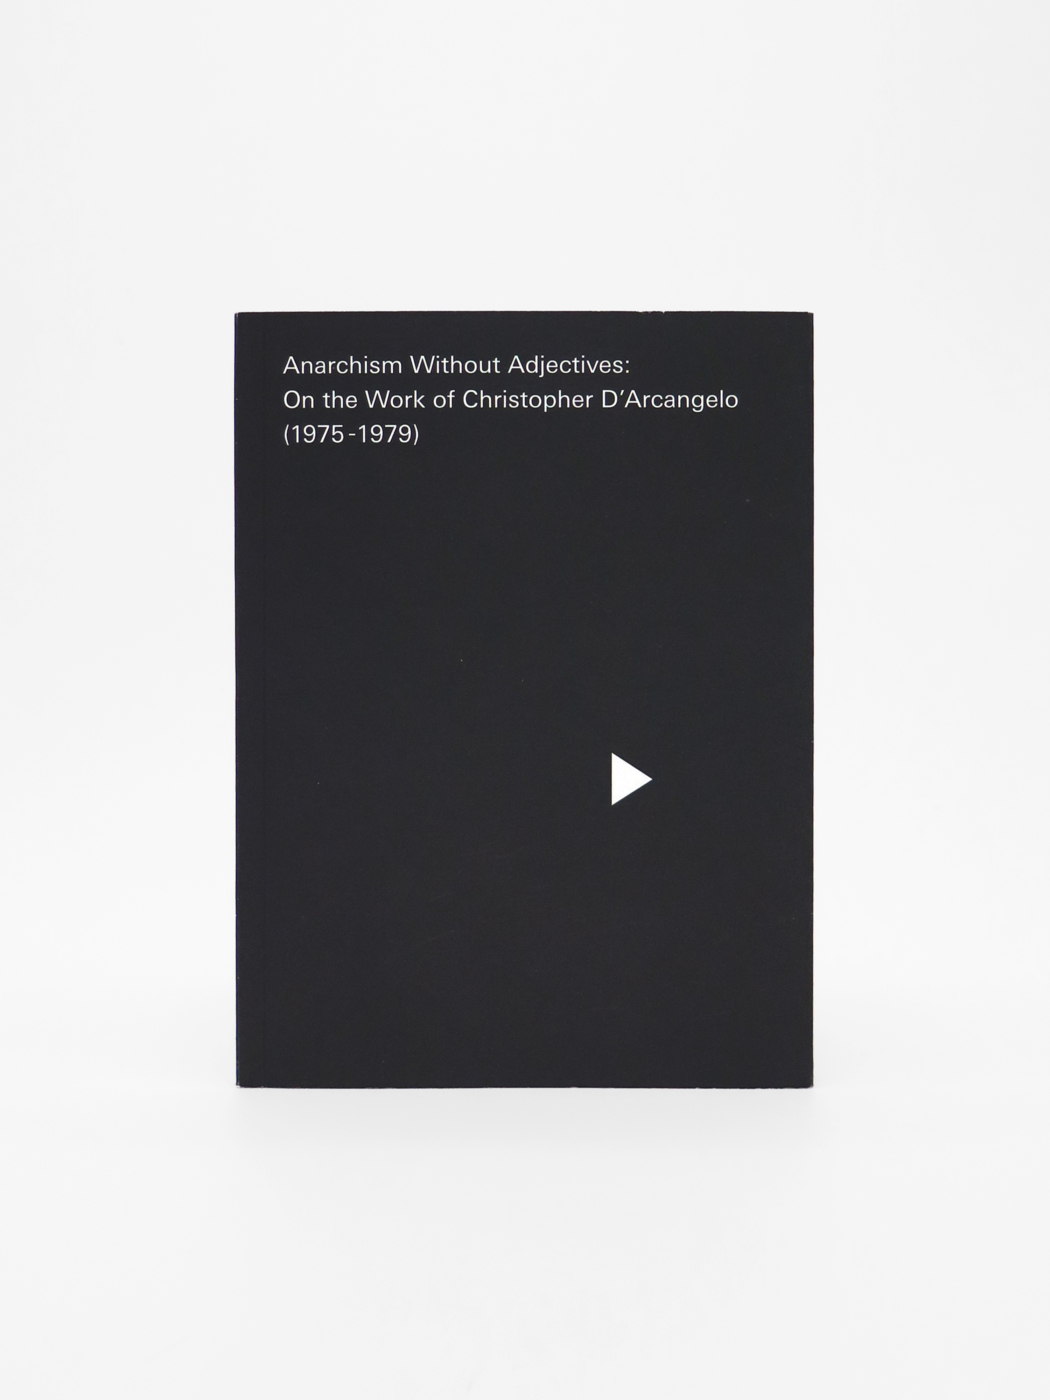 Anarchism Without Adjectives: On the Work of Christopher D'Arcangelo